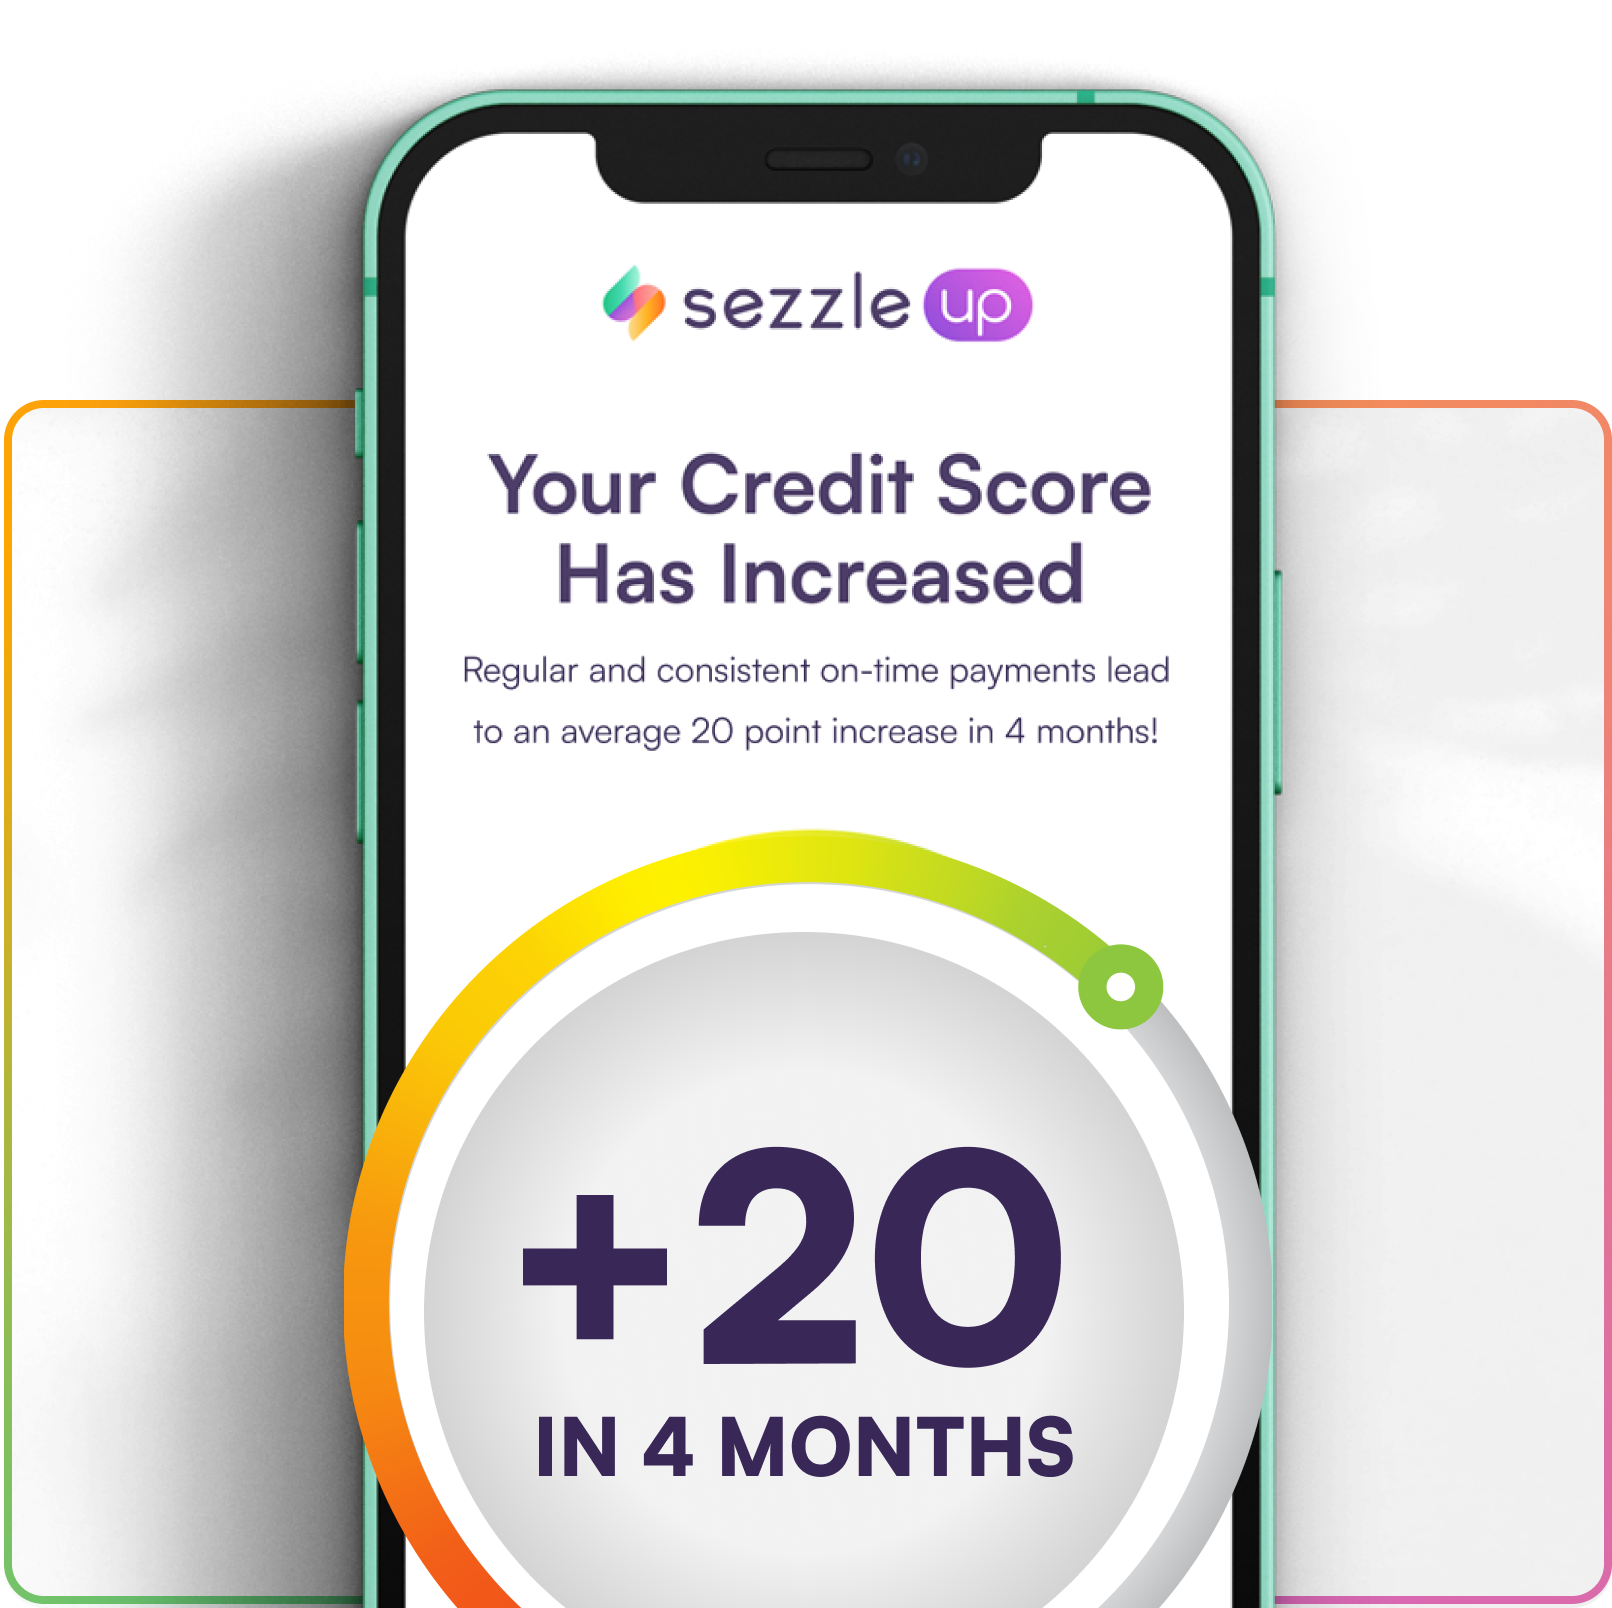 Increase your credit score by 20 points within the first 4 months with Sezzle Up